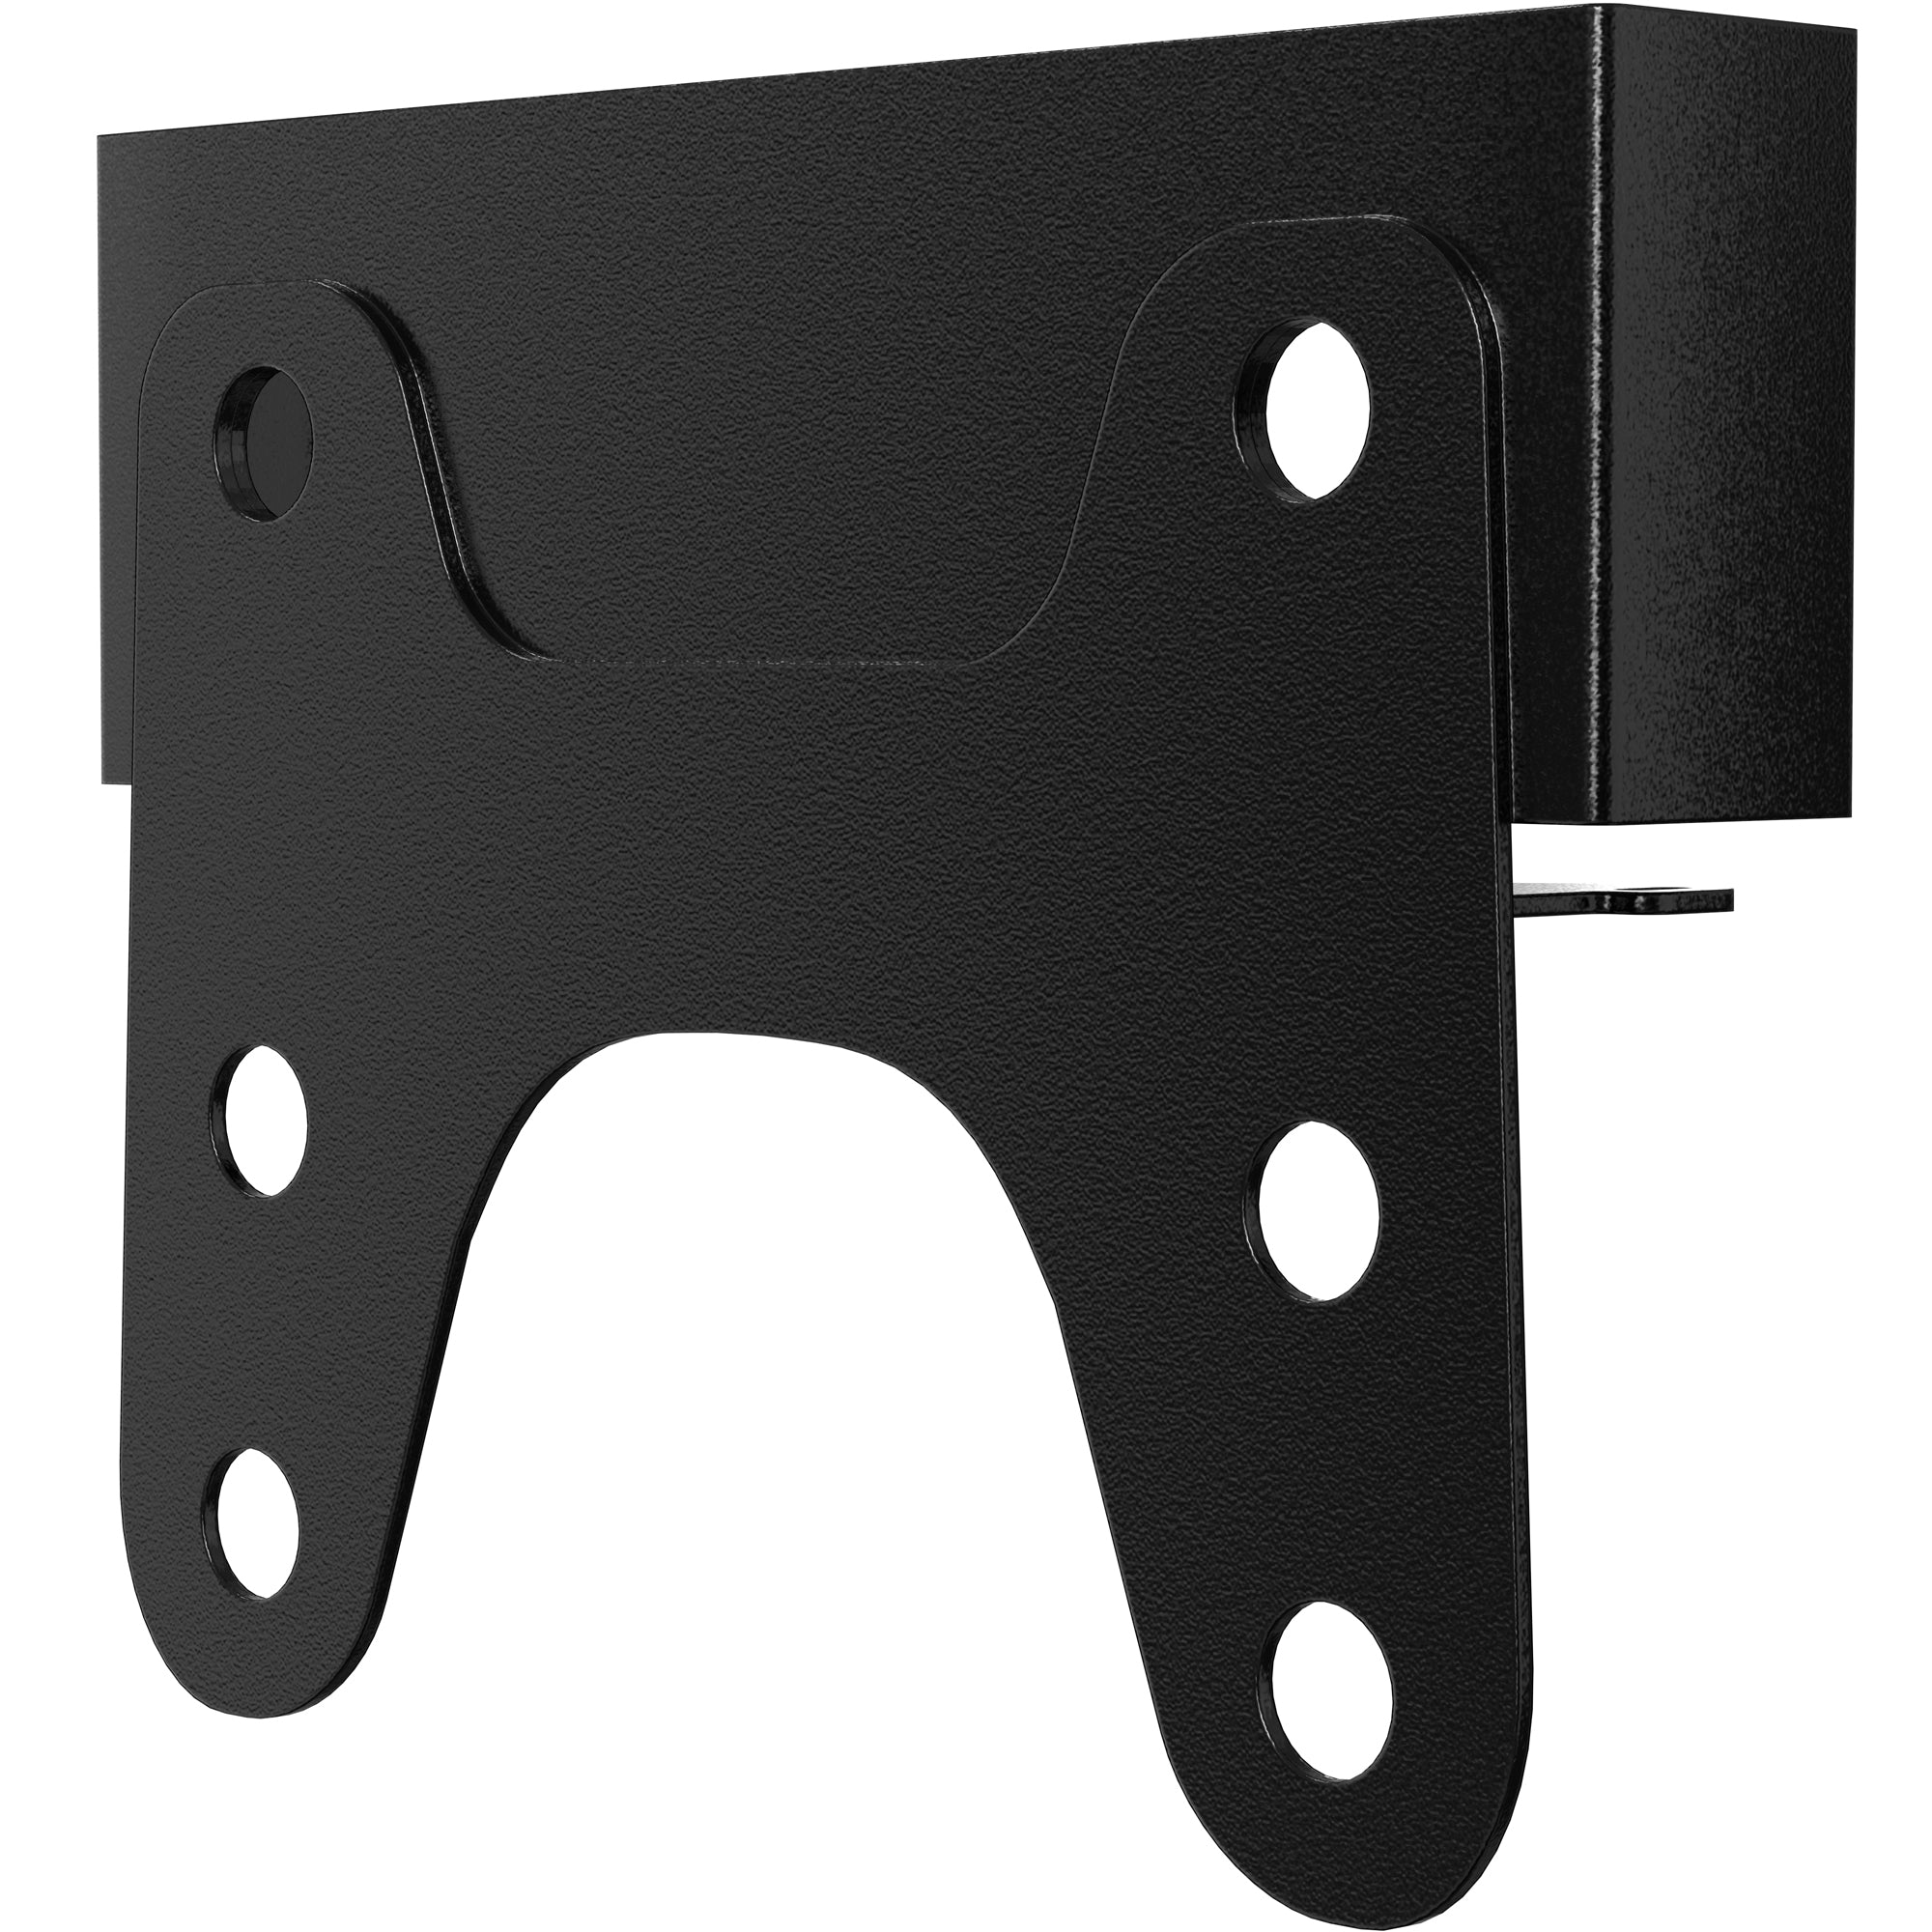 Add-On Moby 5500 Card Reader Bracket for CTA Tablet Cases